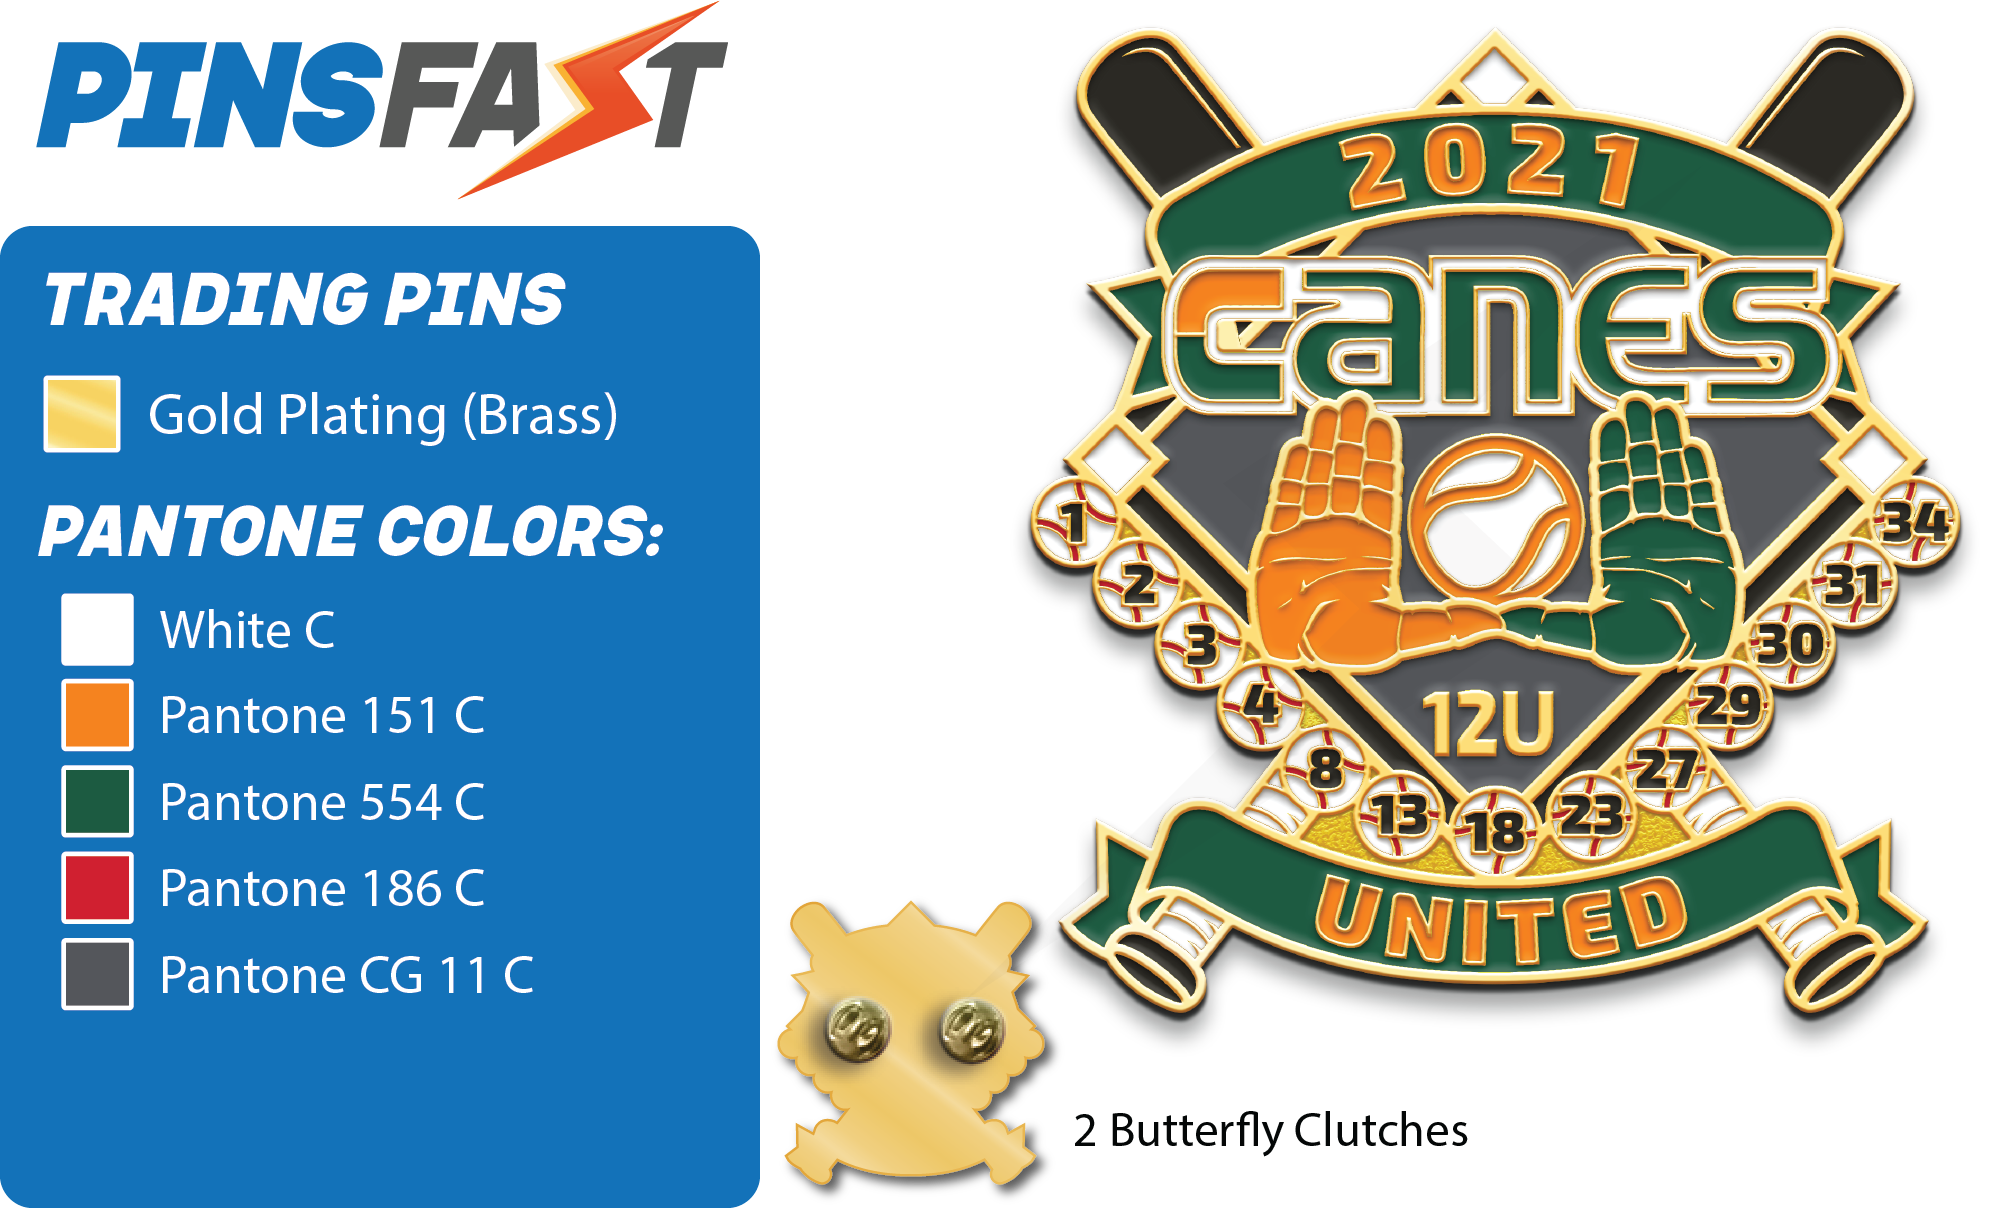 Canes United Trading Pins 2